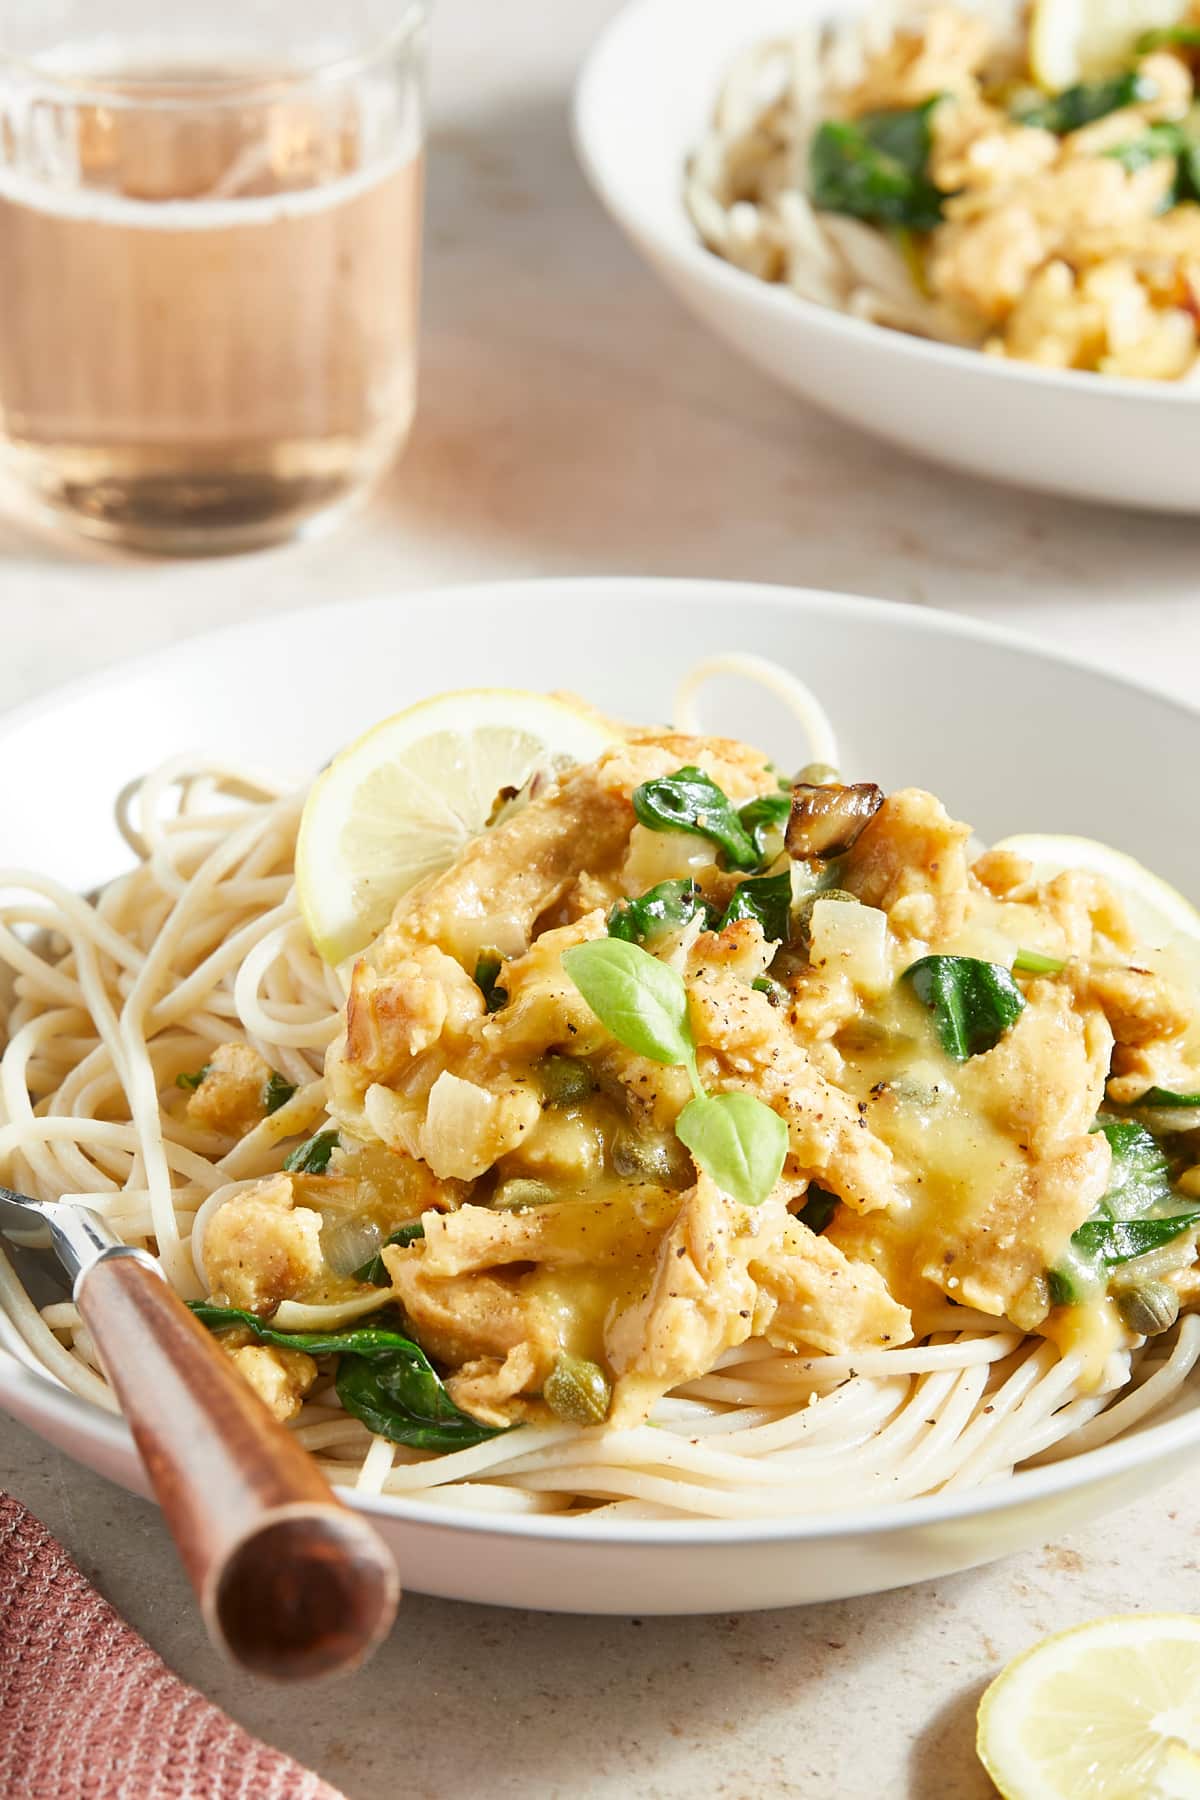 Side view of a plate of vegan chicken piccata over pasta noodles, garnished with lemon slices and fresh herbs. A wooden handled fork sits on the plate.